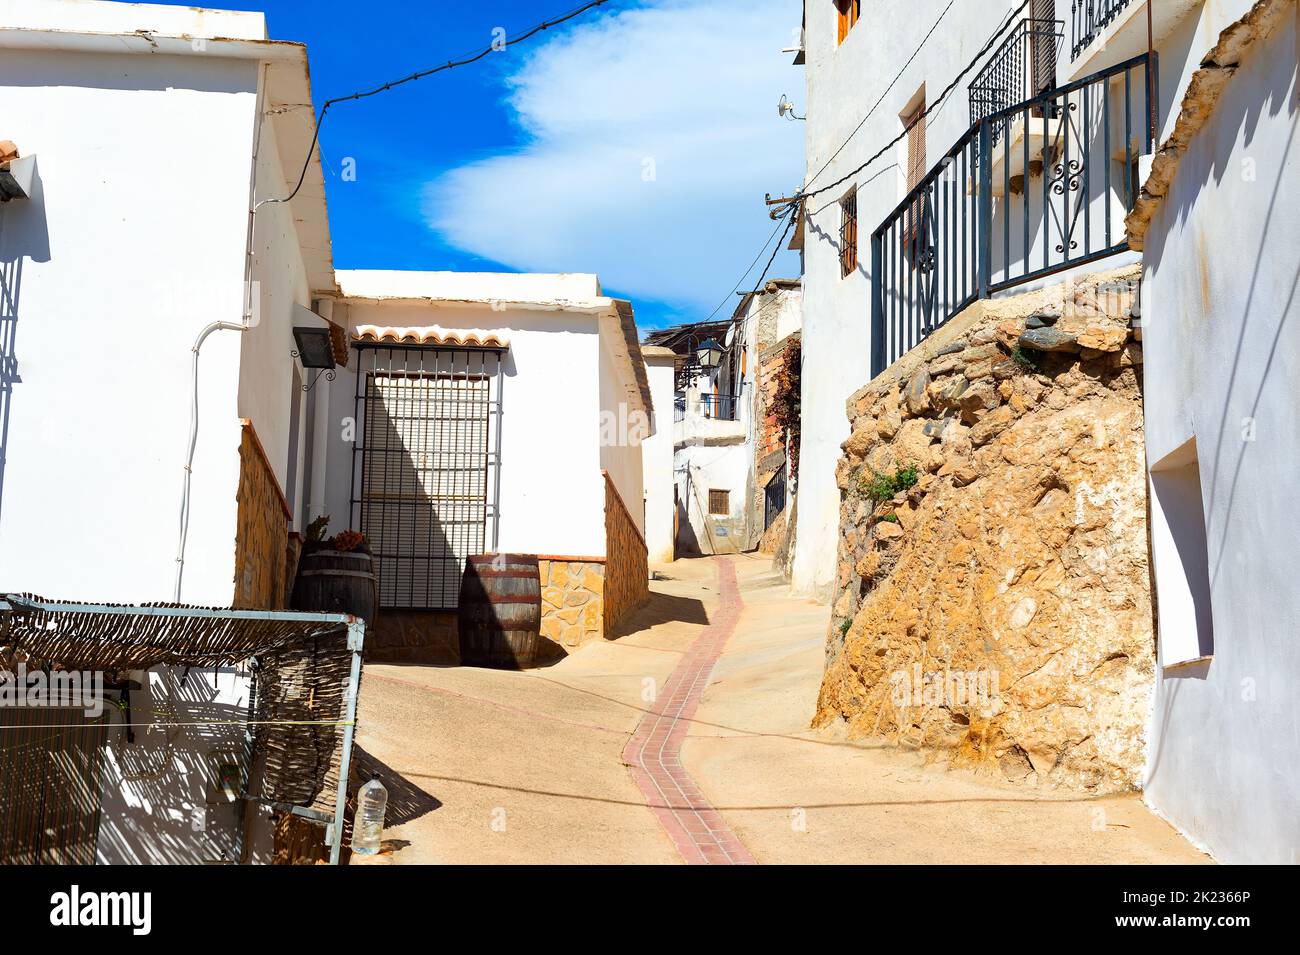 Traditonl architecture, Spain mountain village, white houses of residential area, hill street. Darrical Stock Photo